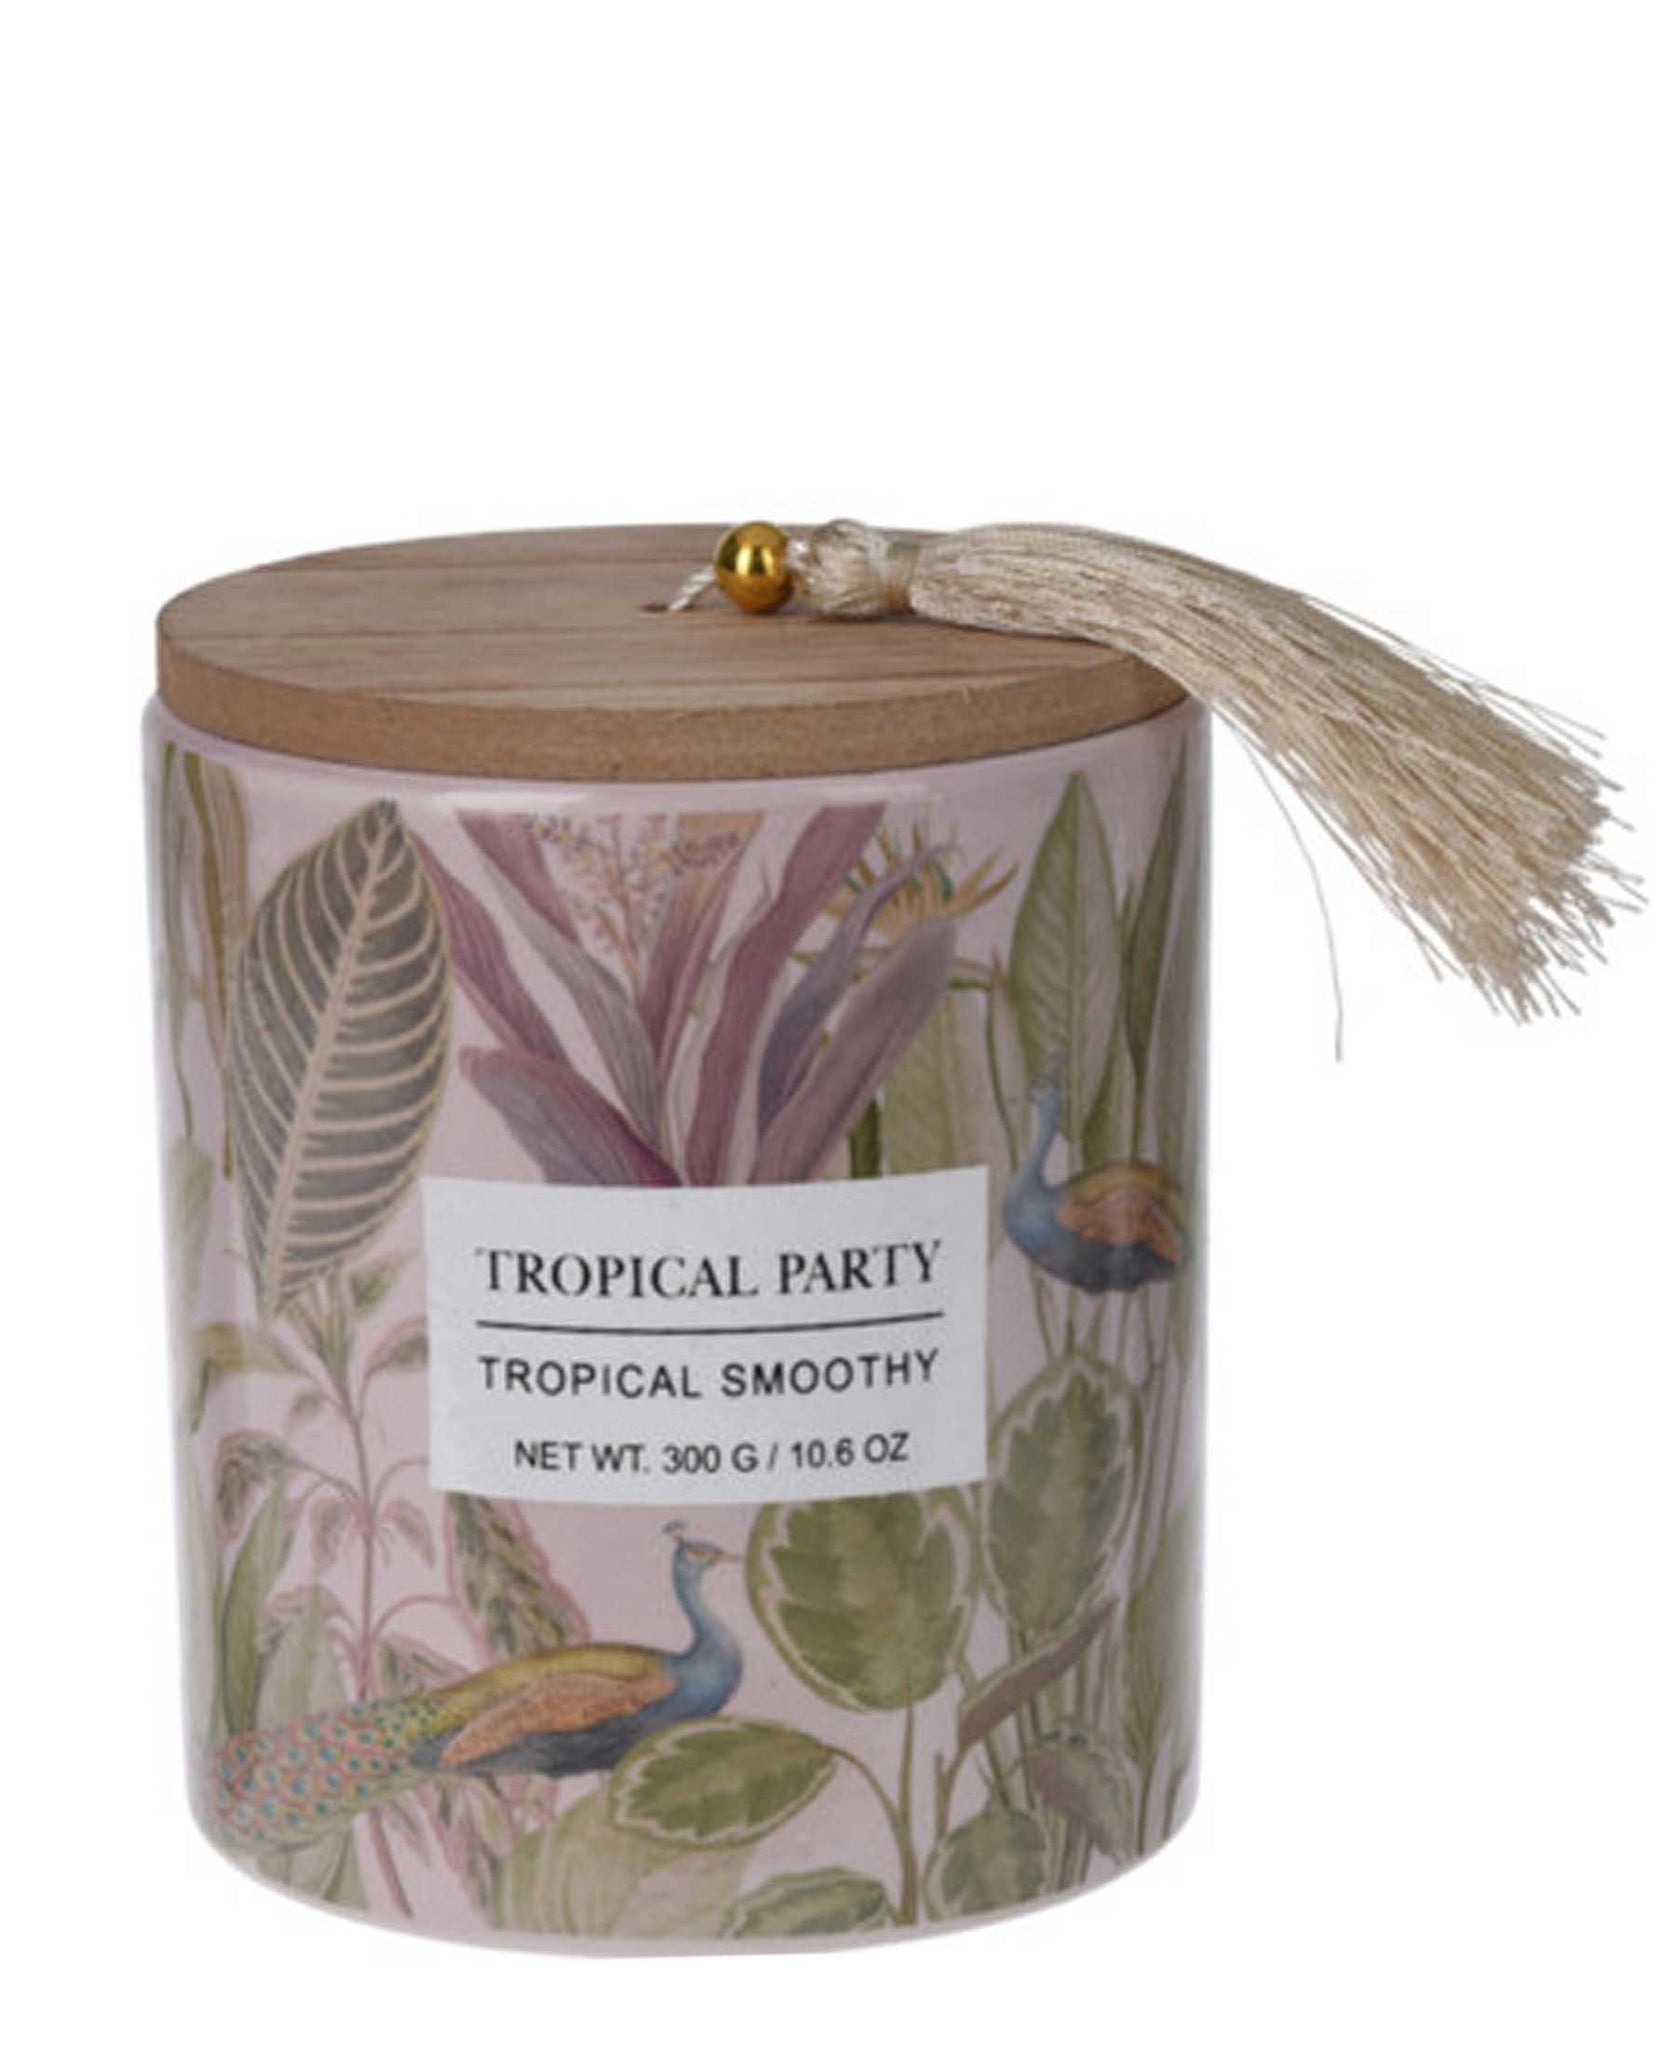 Tropical Party Candle In Ceramic Jar - Tropical Smoothy